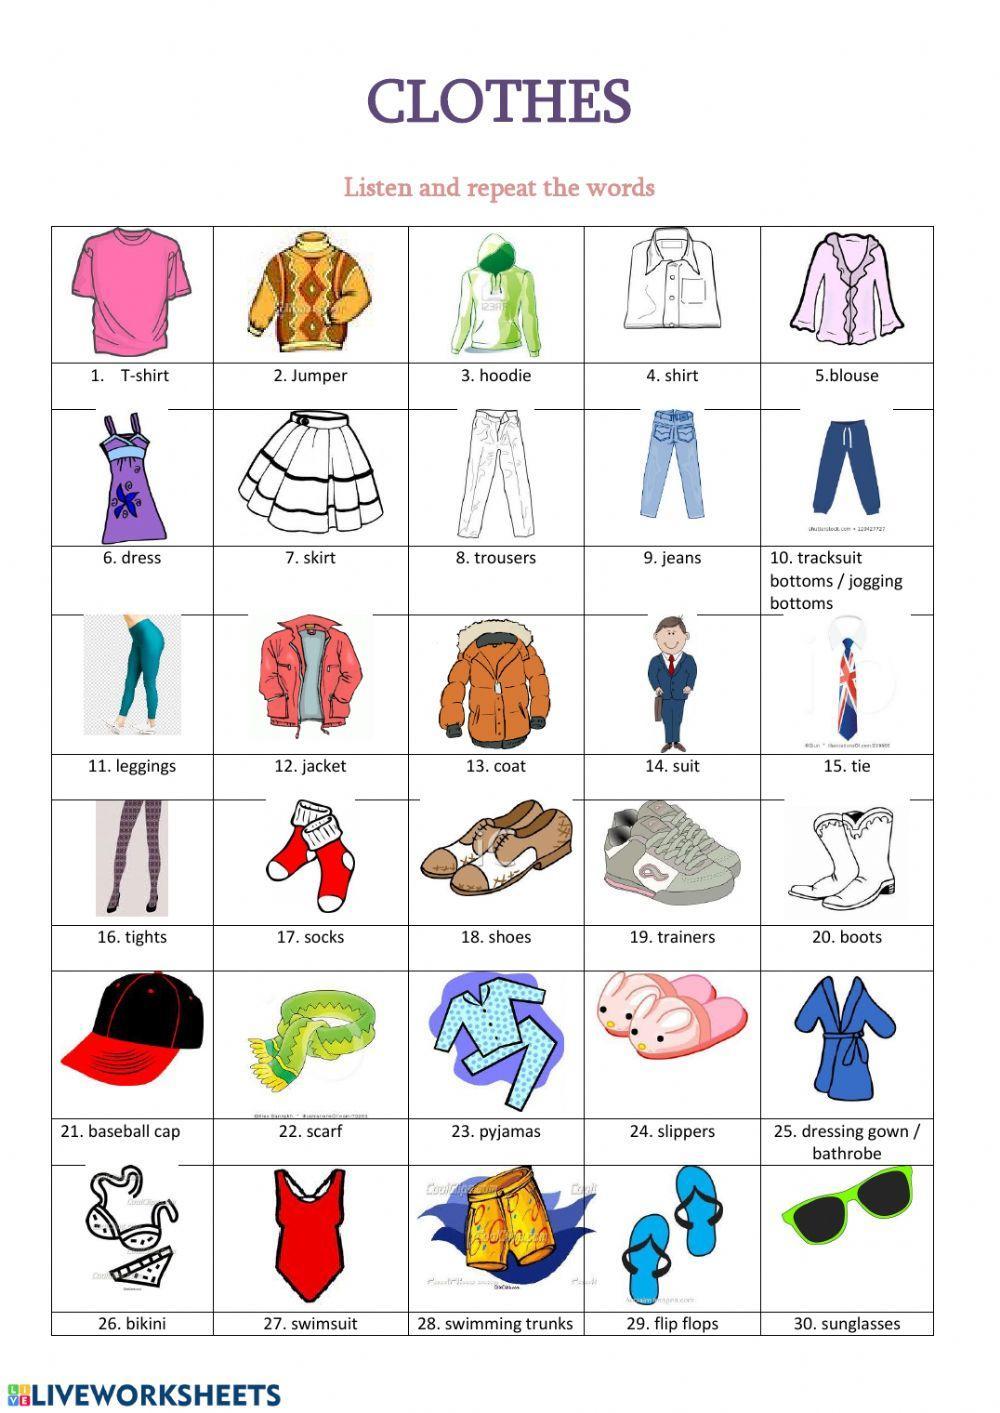 Clothes Vocabulary online worksheet